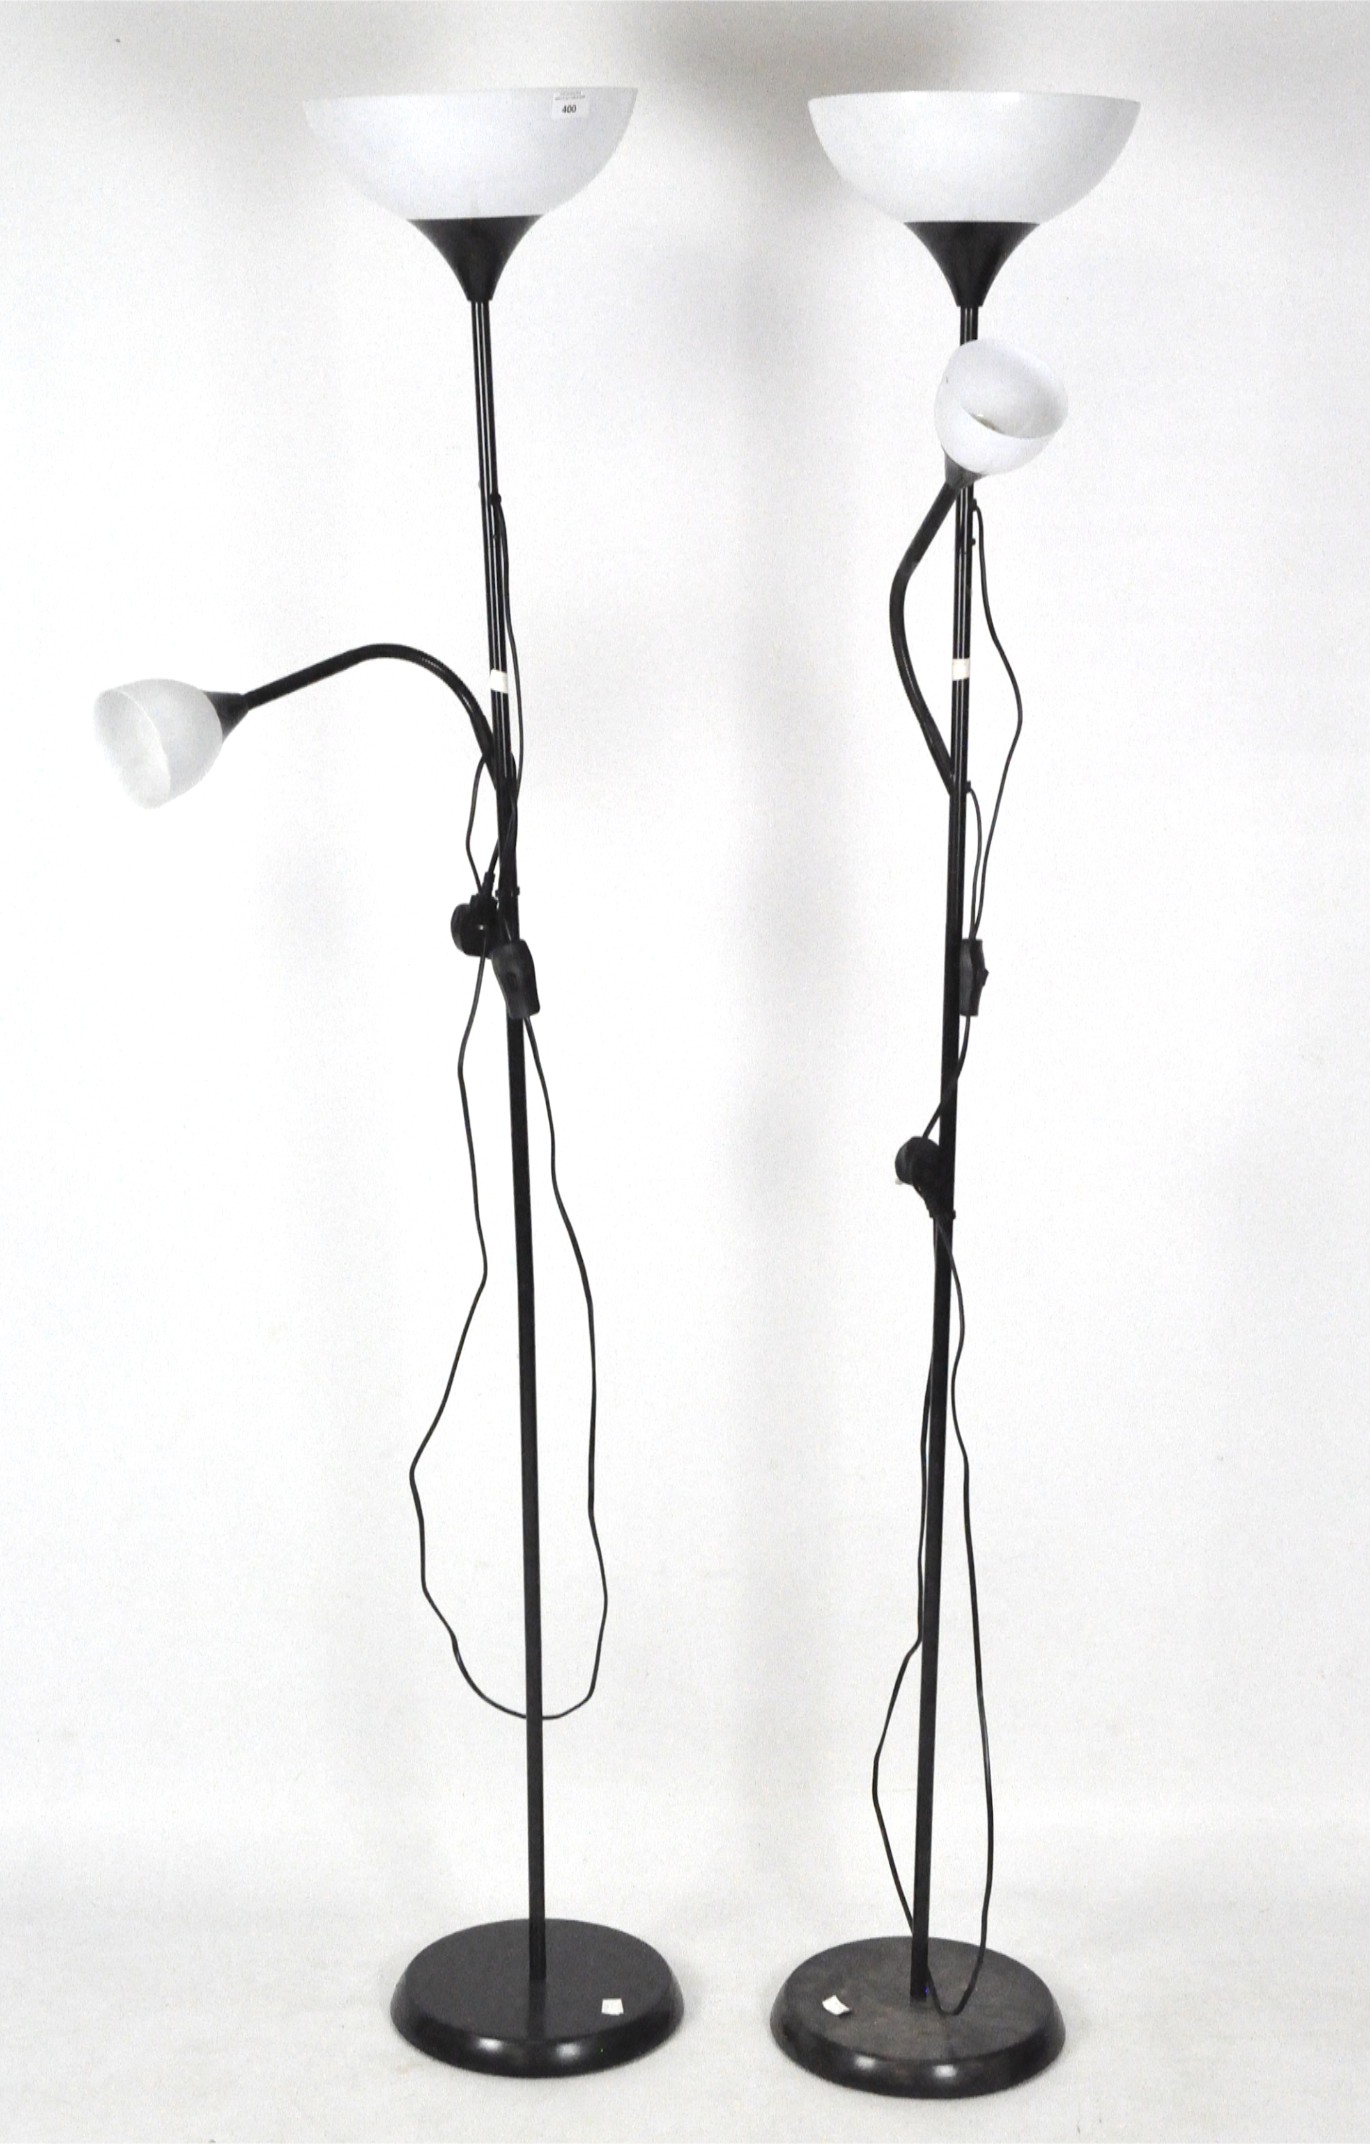 Two modern standard lamps, both with adjustable secondary lamp and uplight,